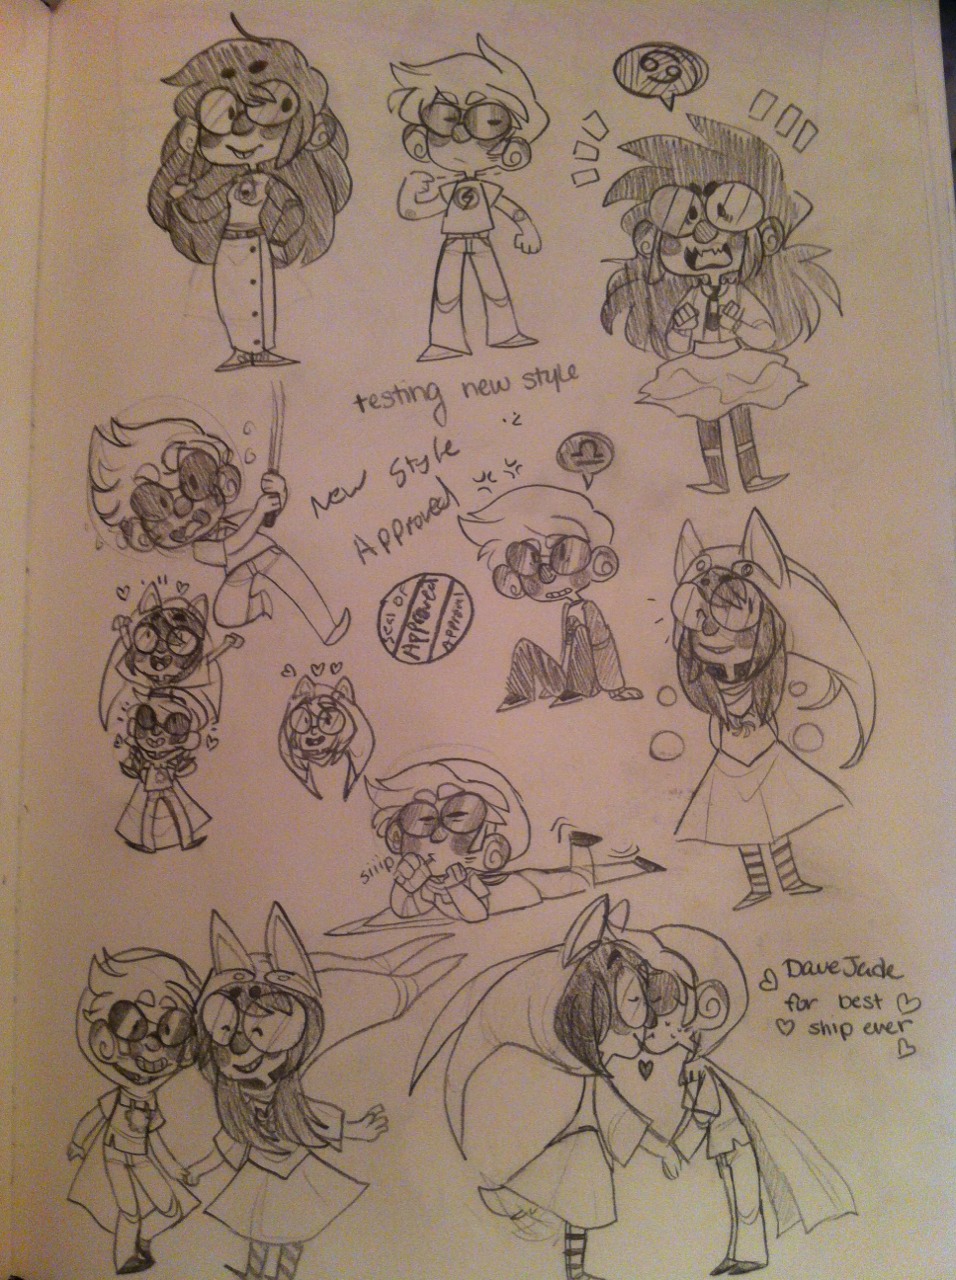 apple_juice art_dump carrying dave_strider dogtier dress_of_eclectica godtier heart holding_hands jade_harley katana kelded kiss knight redrom sepia shipping sketch spacetime squiddlejacket starter_outfit witch word_balloon zodiac_symbol